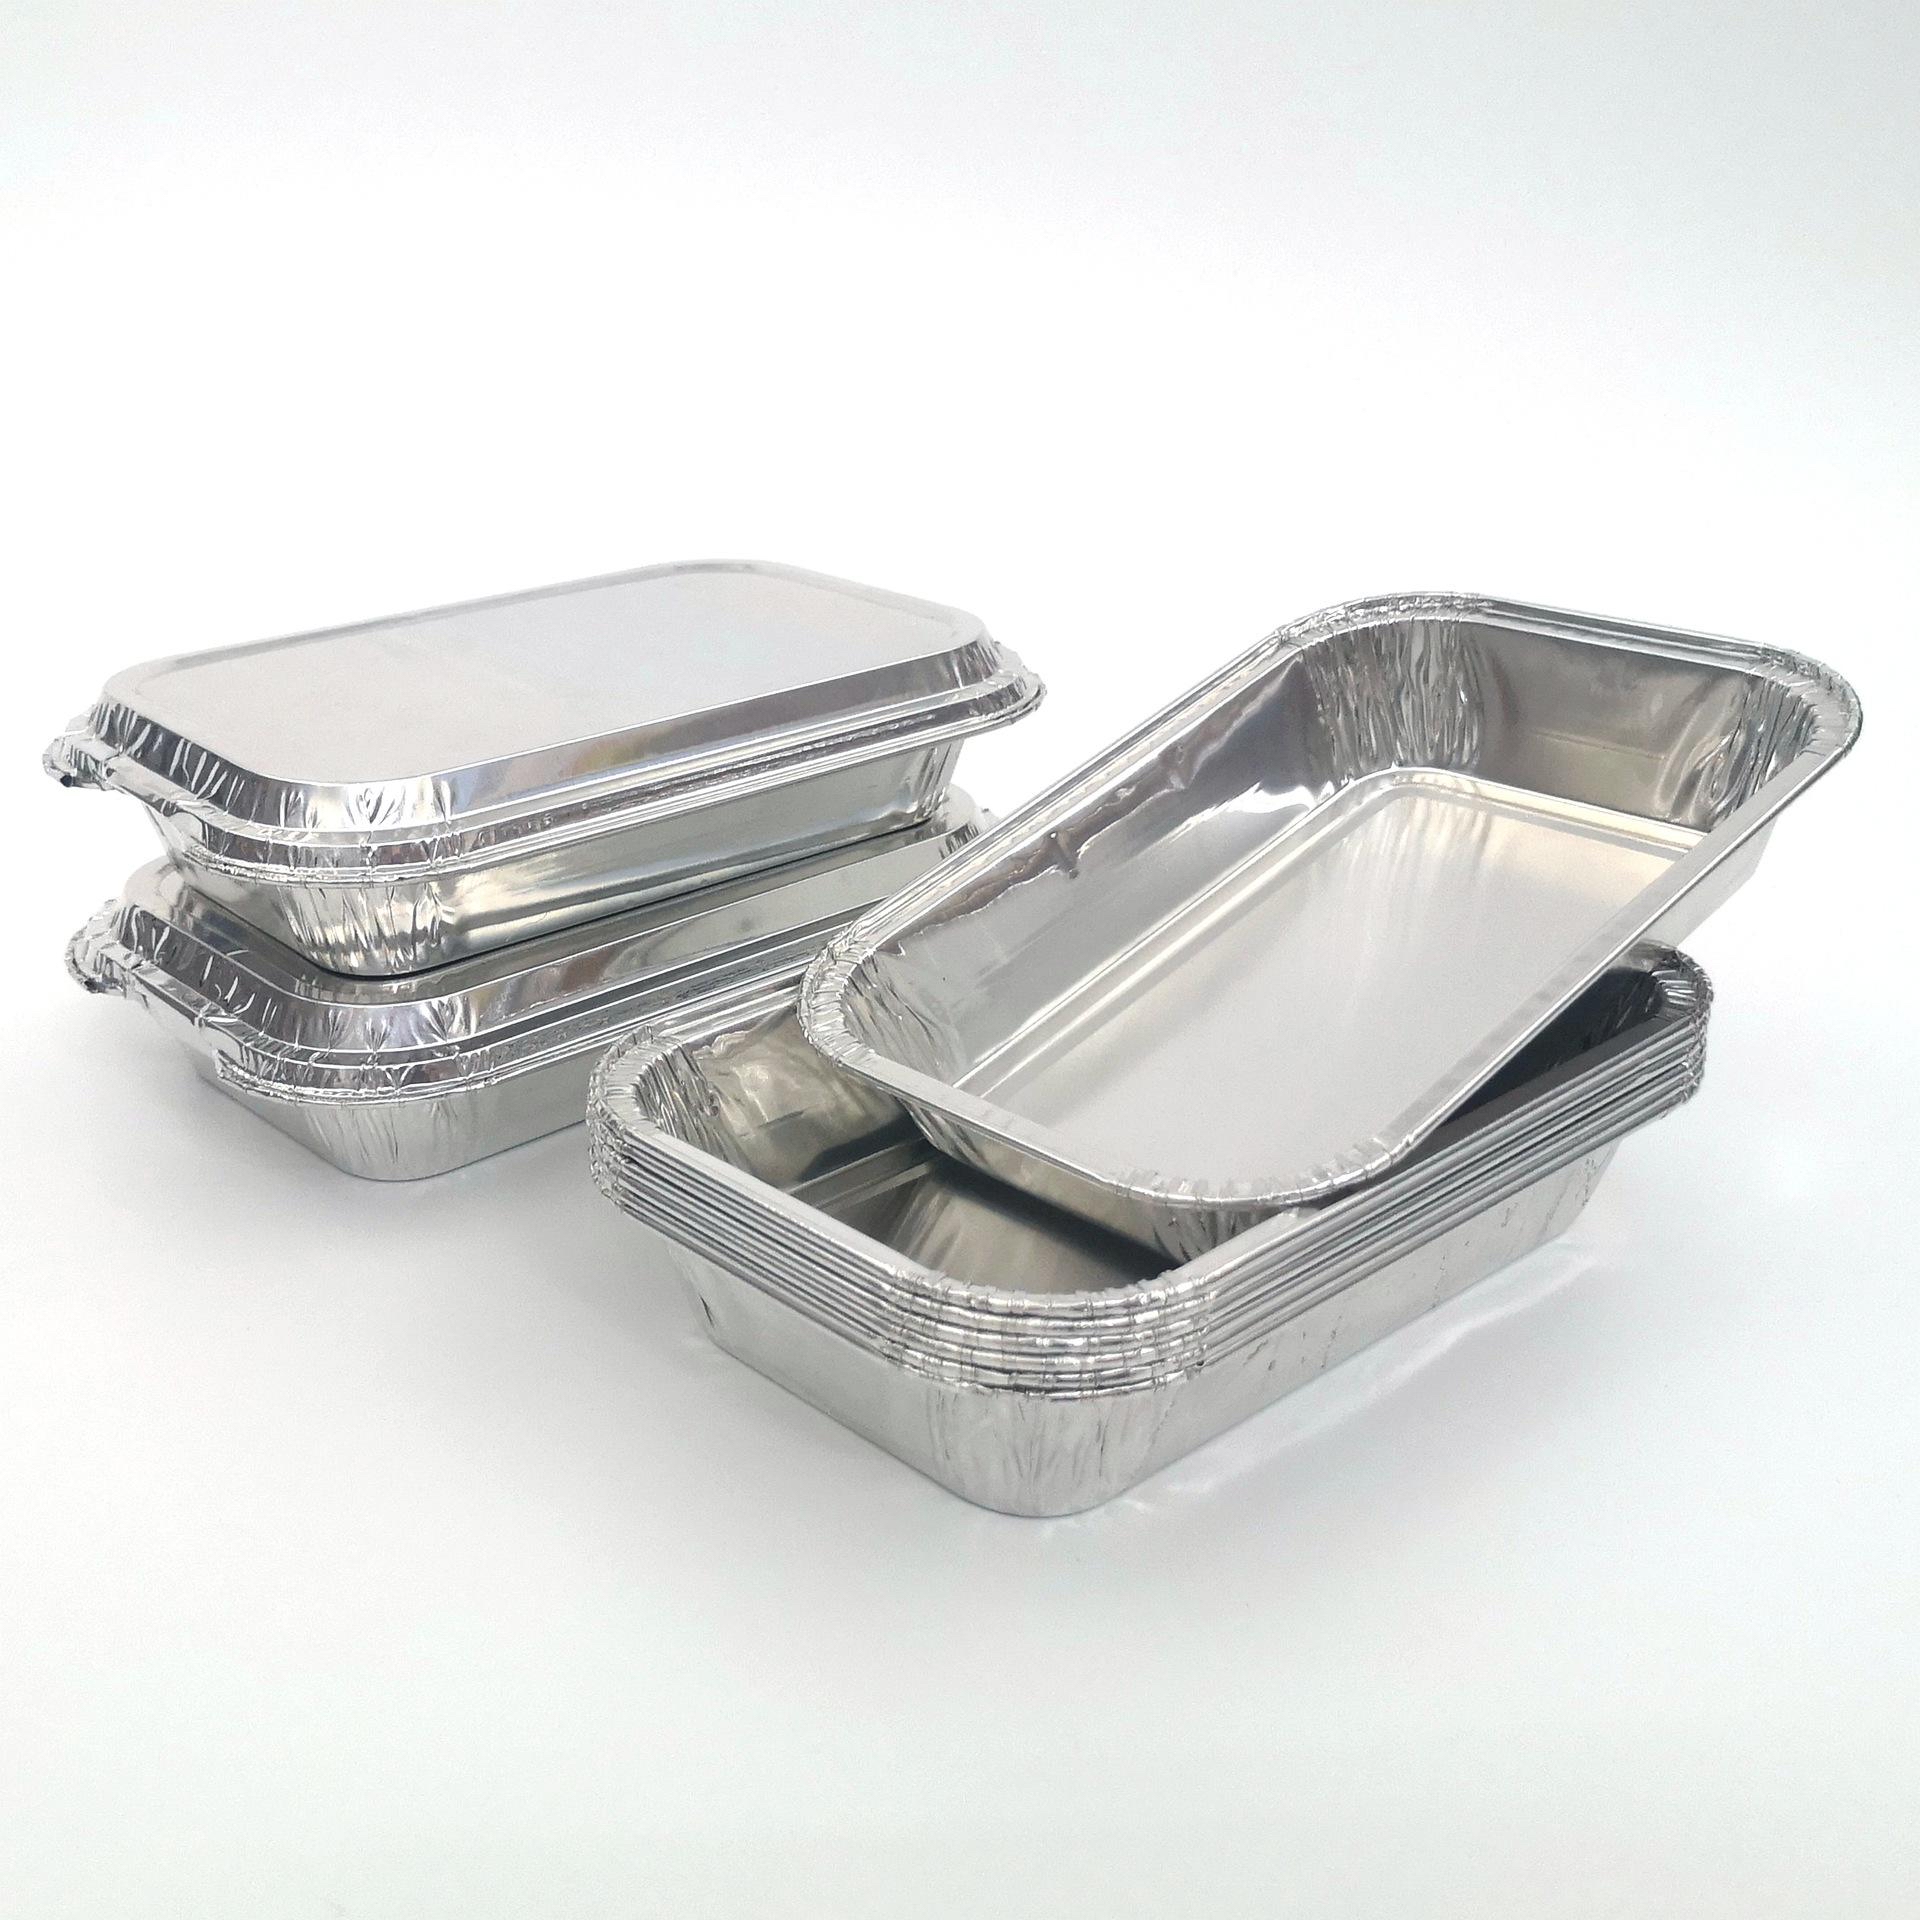 /product/special-aluminum-products/aluminum-containeraluminum-foil-lunch-box.html